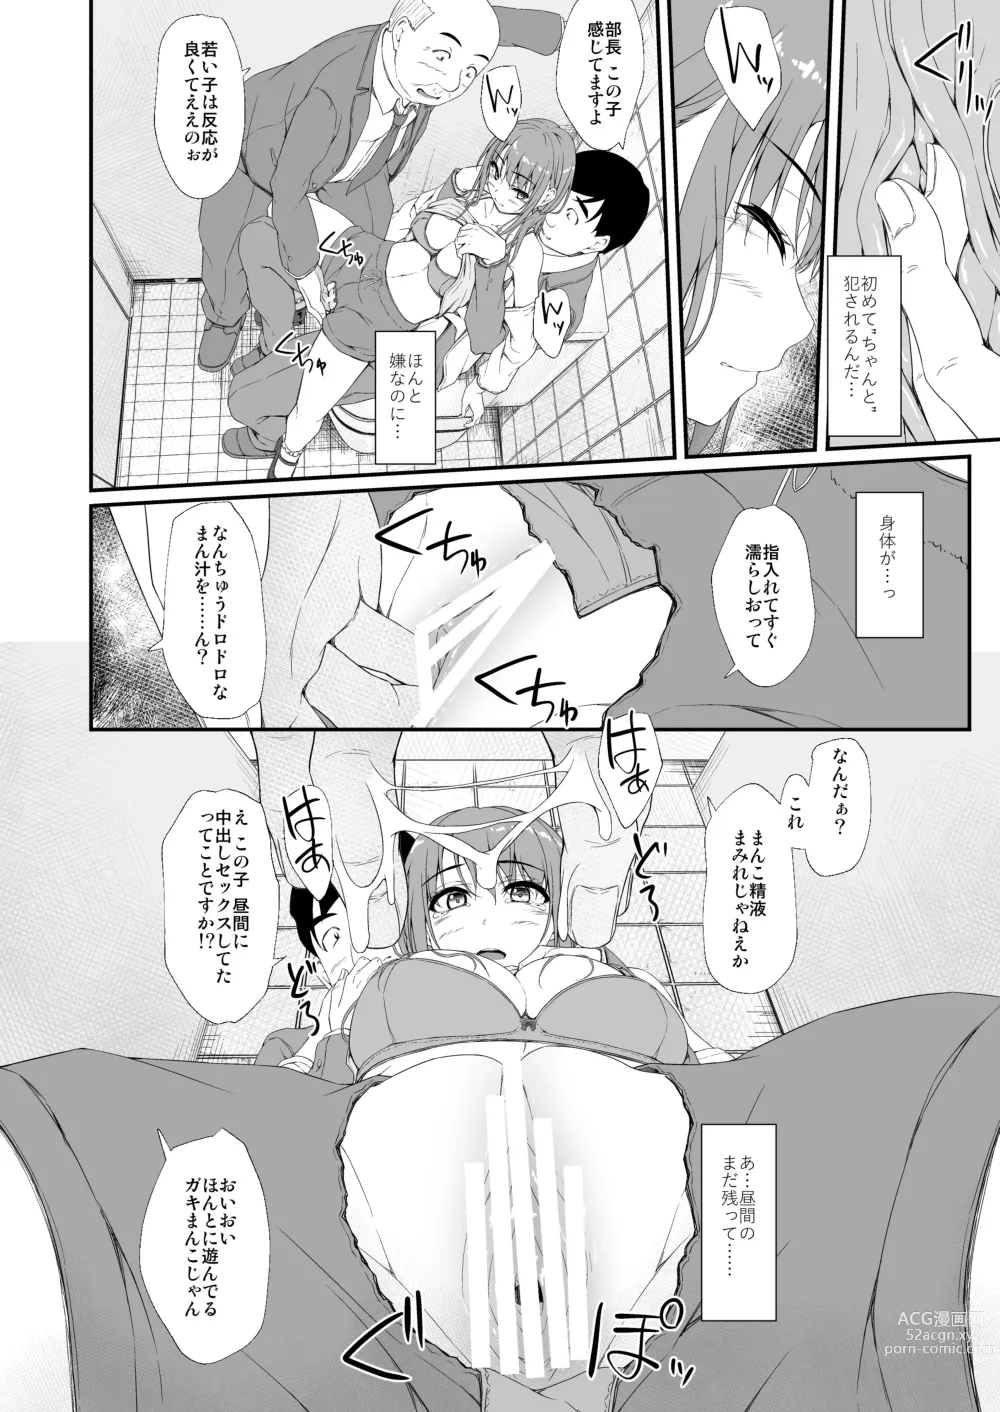 Page 9 of doujinshi Re:Temptation 6